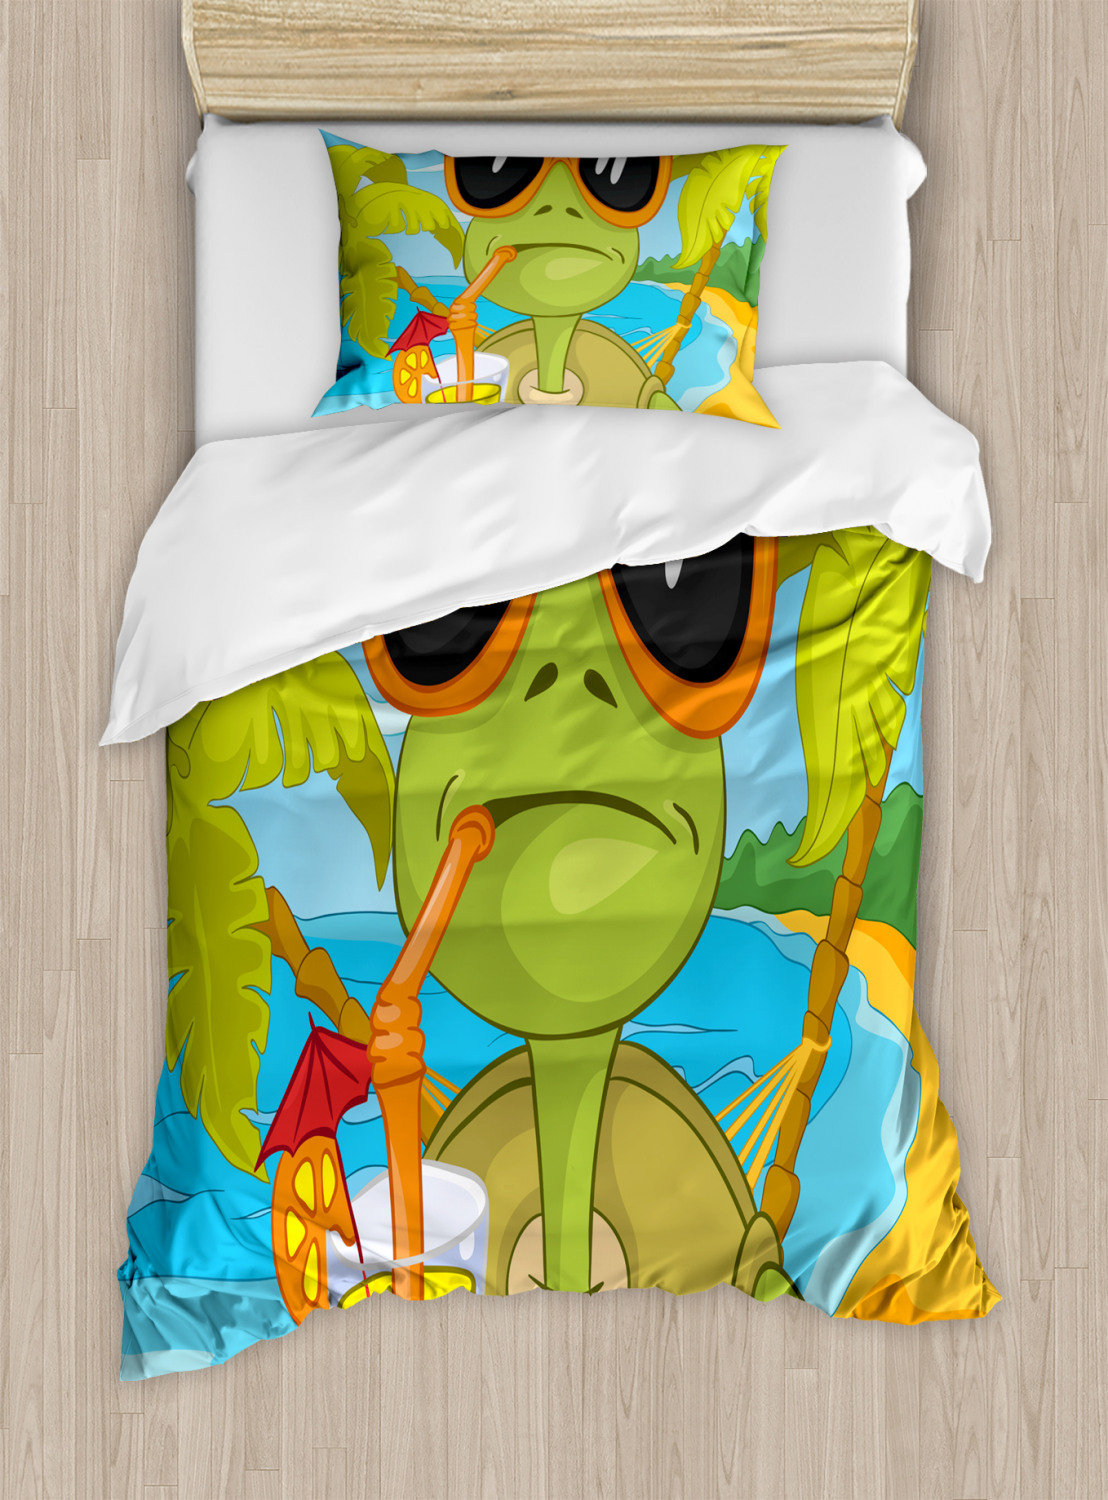 Turtle Duvet Cover Set Twin Queen King Sizes With Pillow Shams Ambesonne Ebay